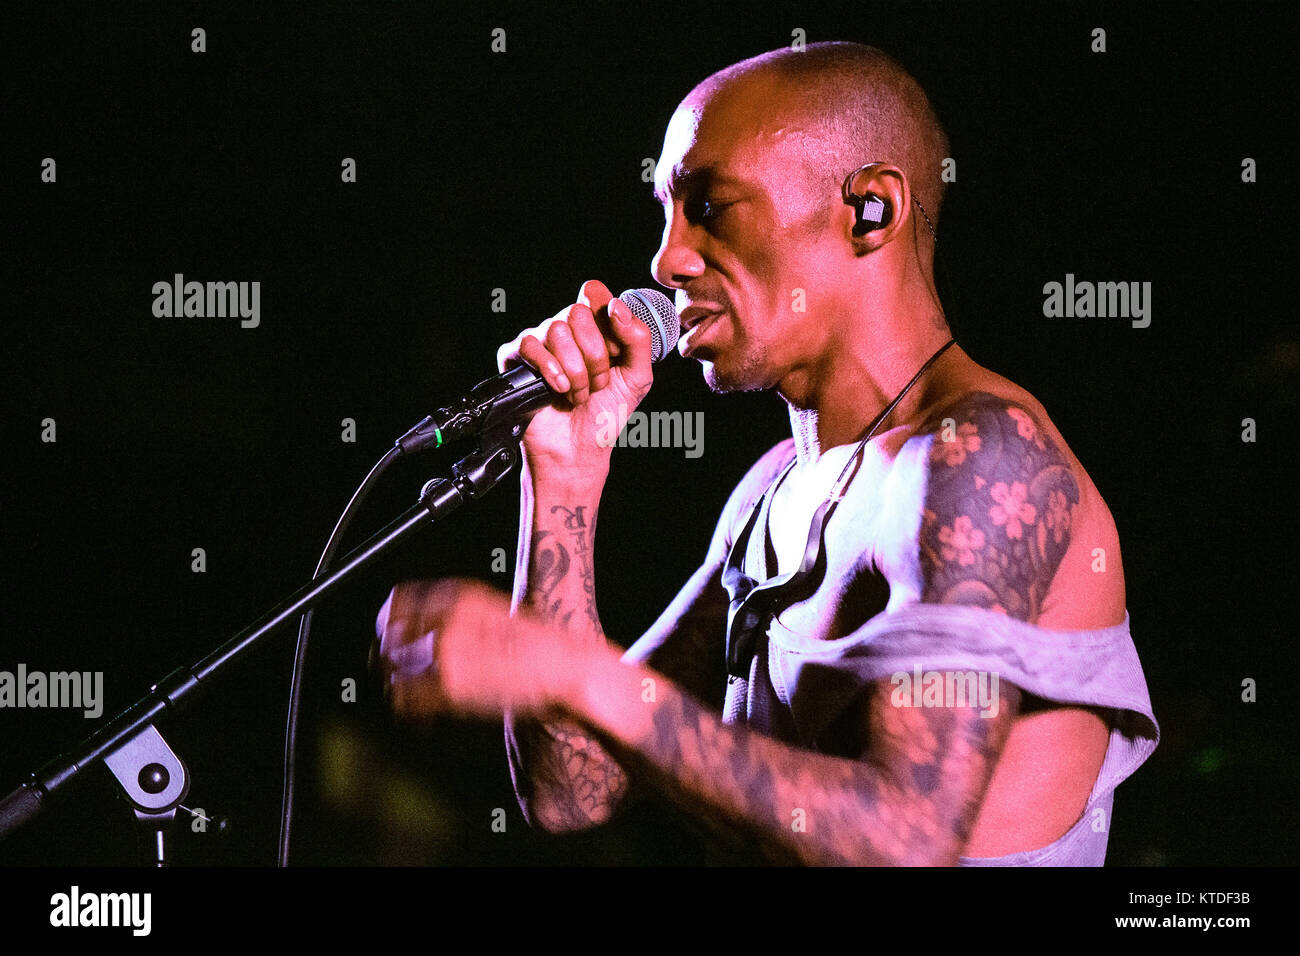 The English trip hop musician, singer and producer Tricky performs a live concert at Forum in Copenhagen. Denmark, 14/04 2016. Stock Photo